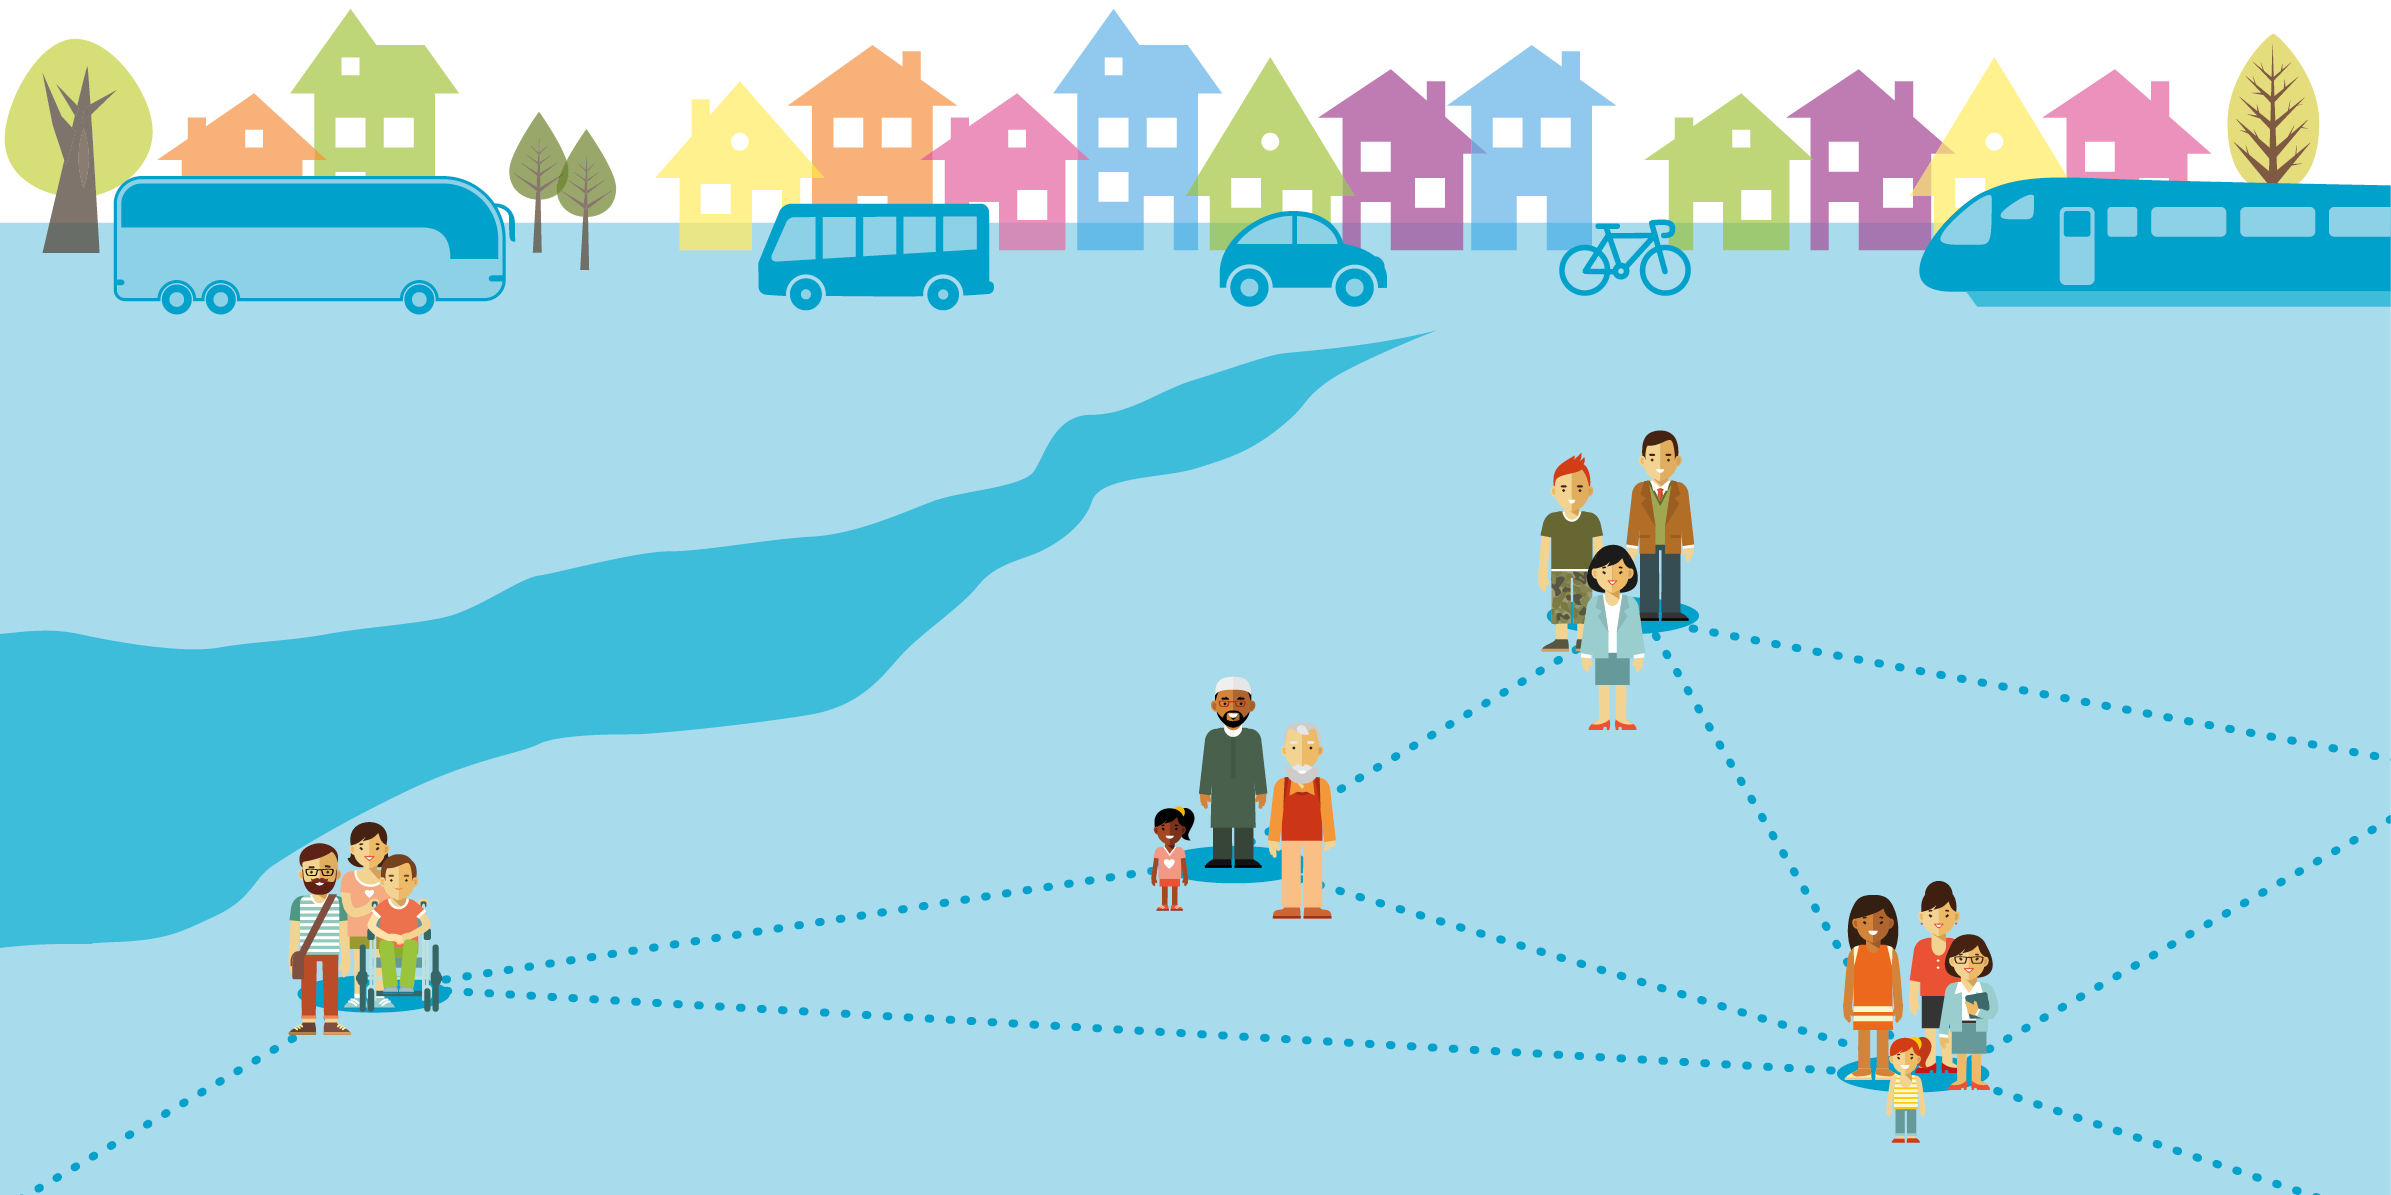 West of England Combined Authority consultation background image illustration showing different groups of people connected via dotted lines and a coach, bus, car, bicycle and train in the background in front of a colourful line of houses and trees.